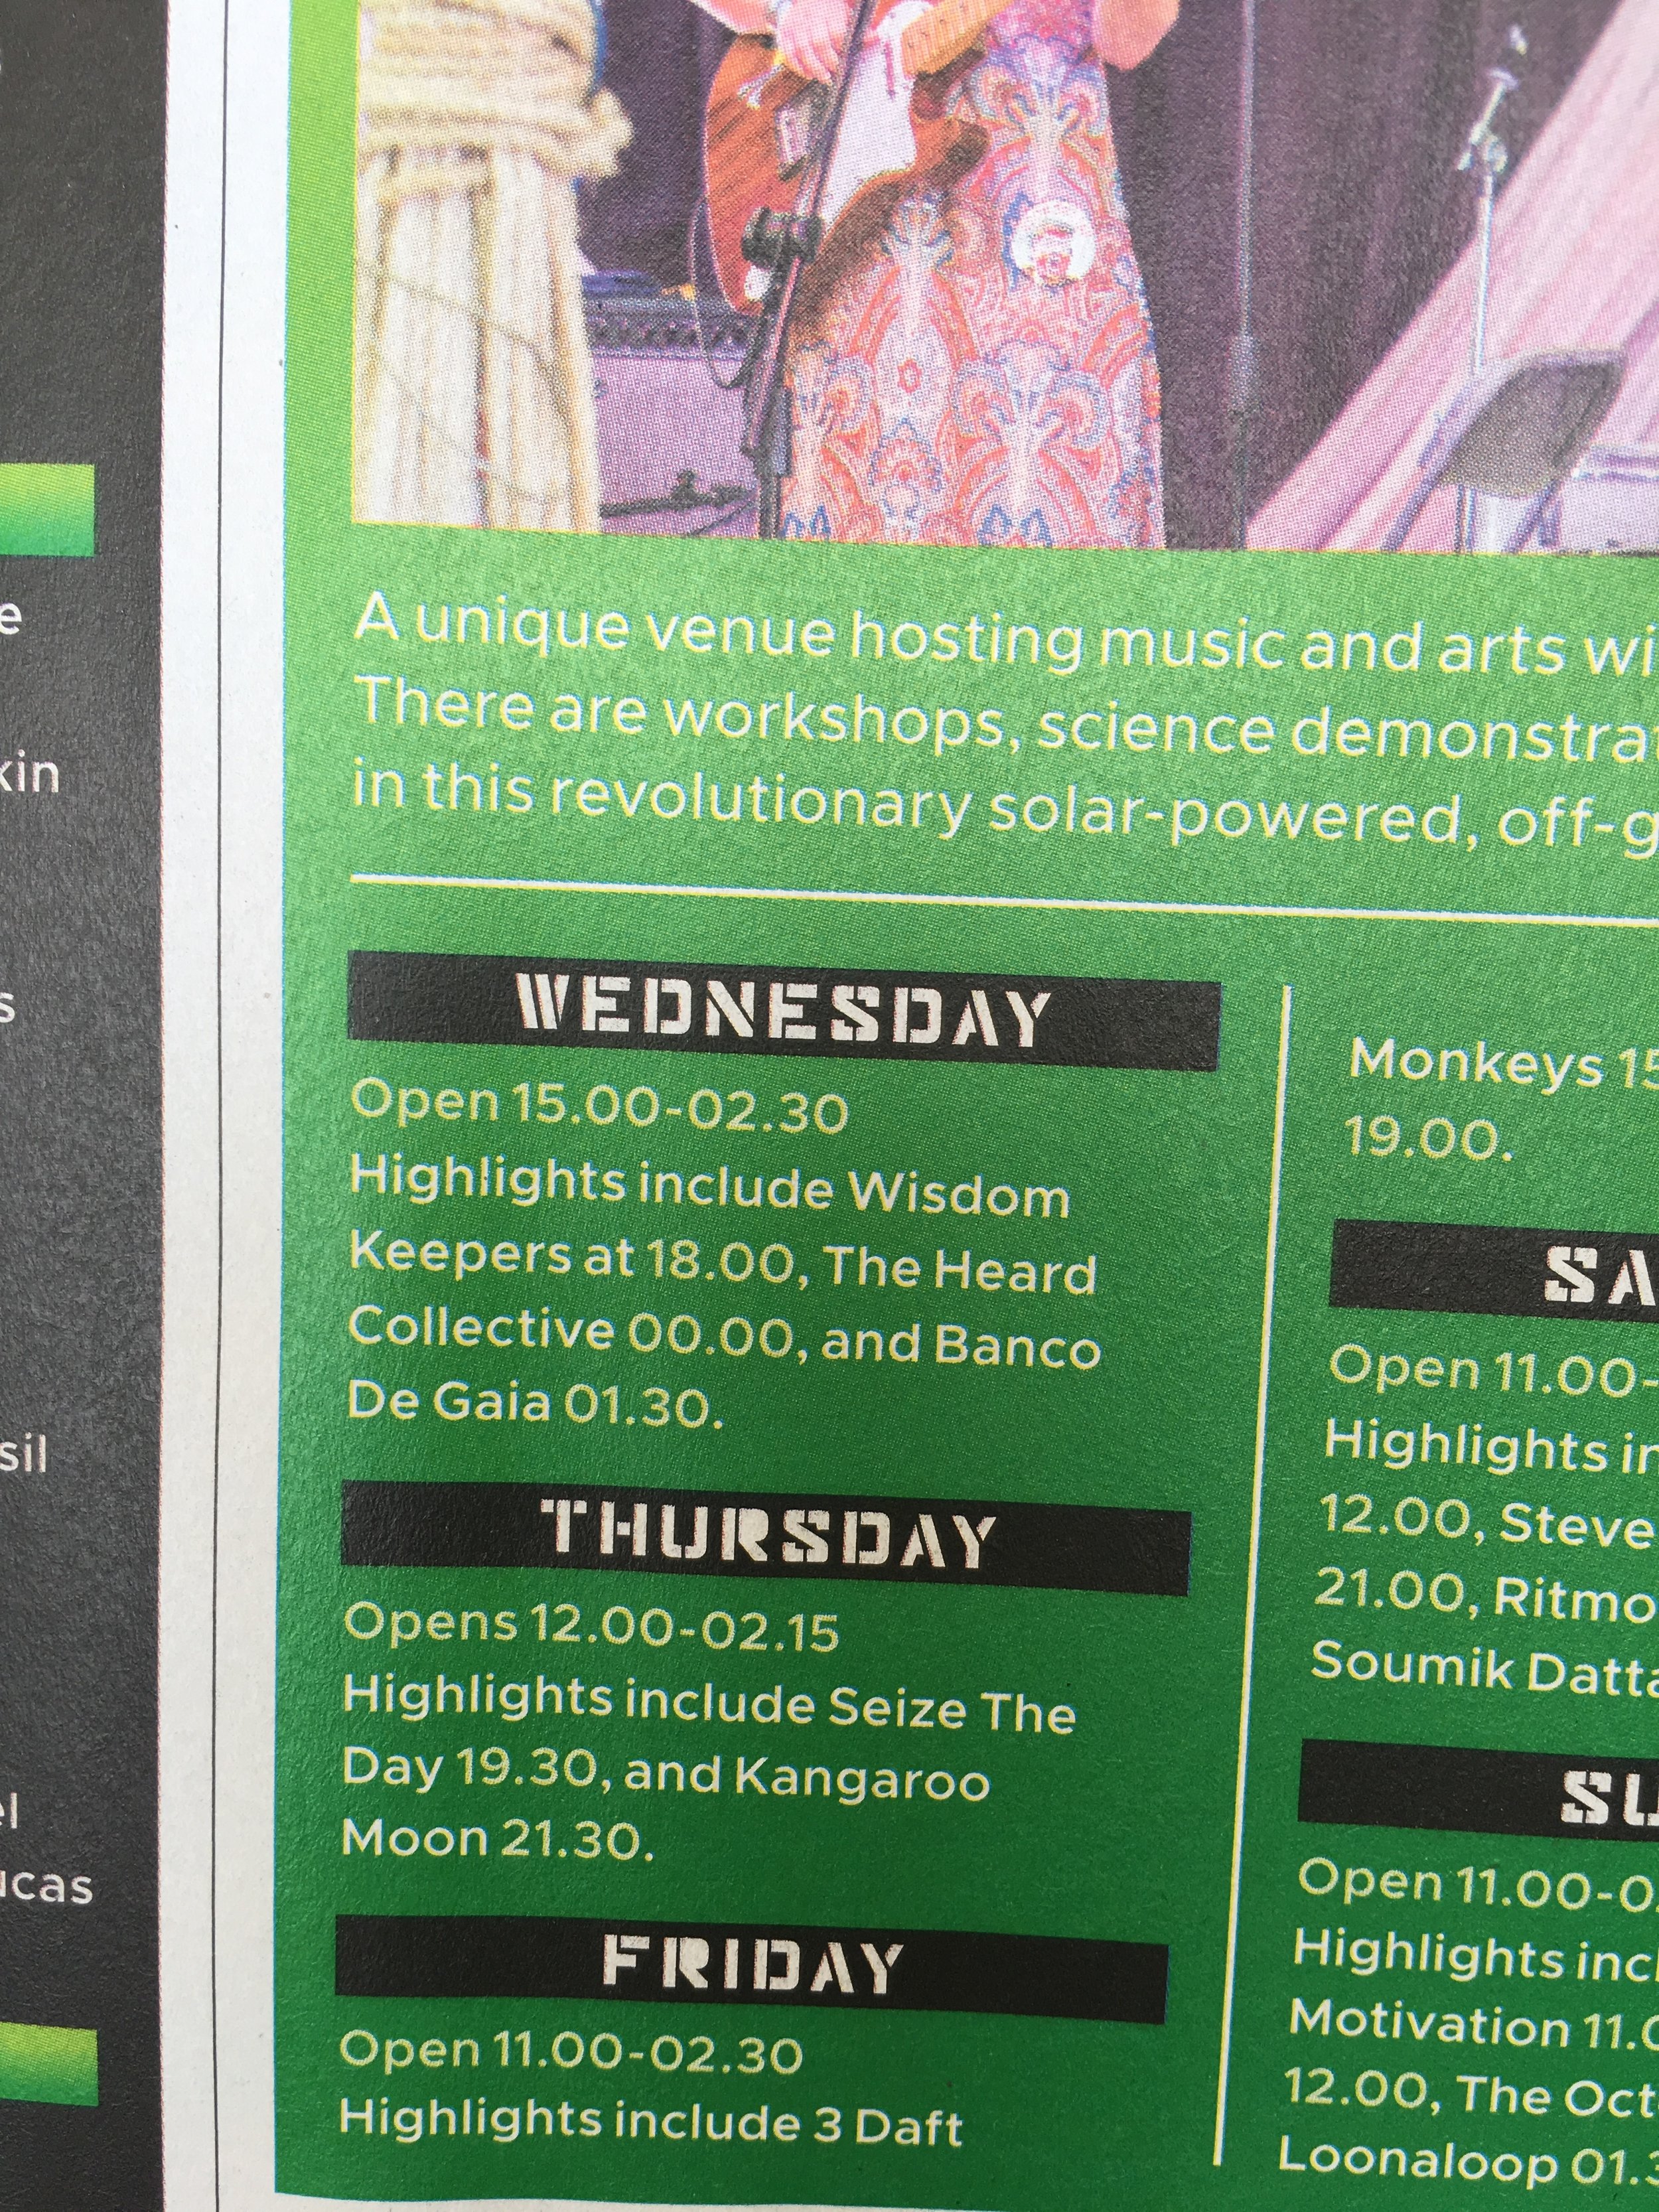 HEARD Collective featured in the Glastonbury 2019 Festival Programme highlights